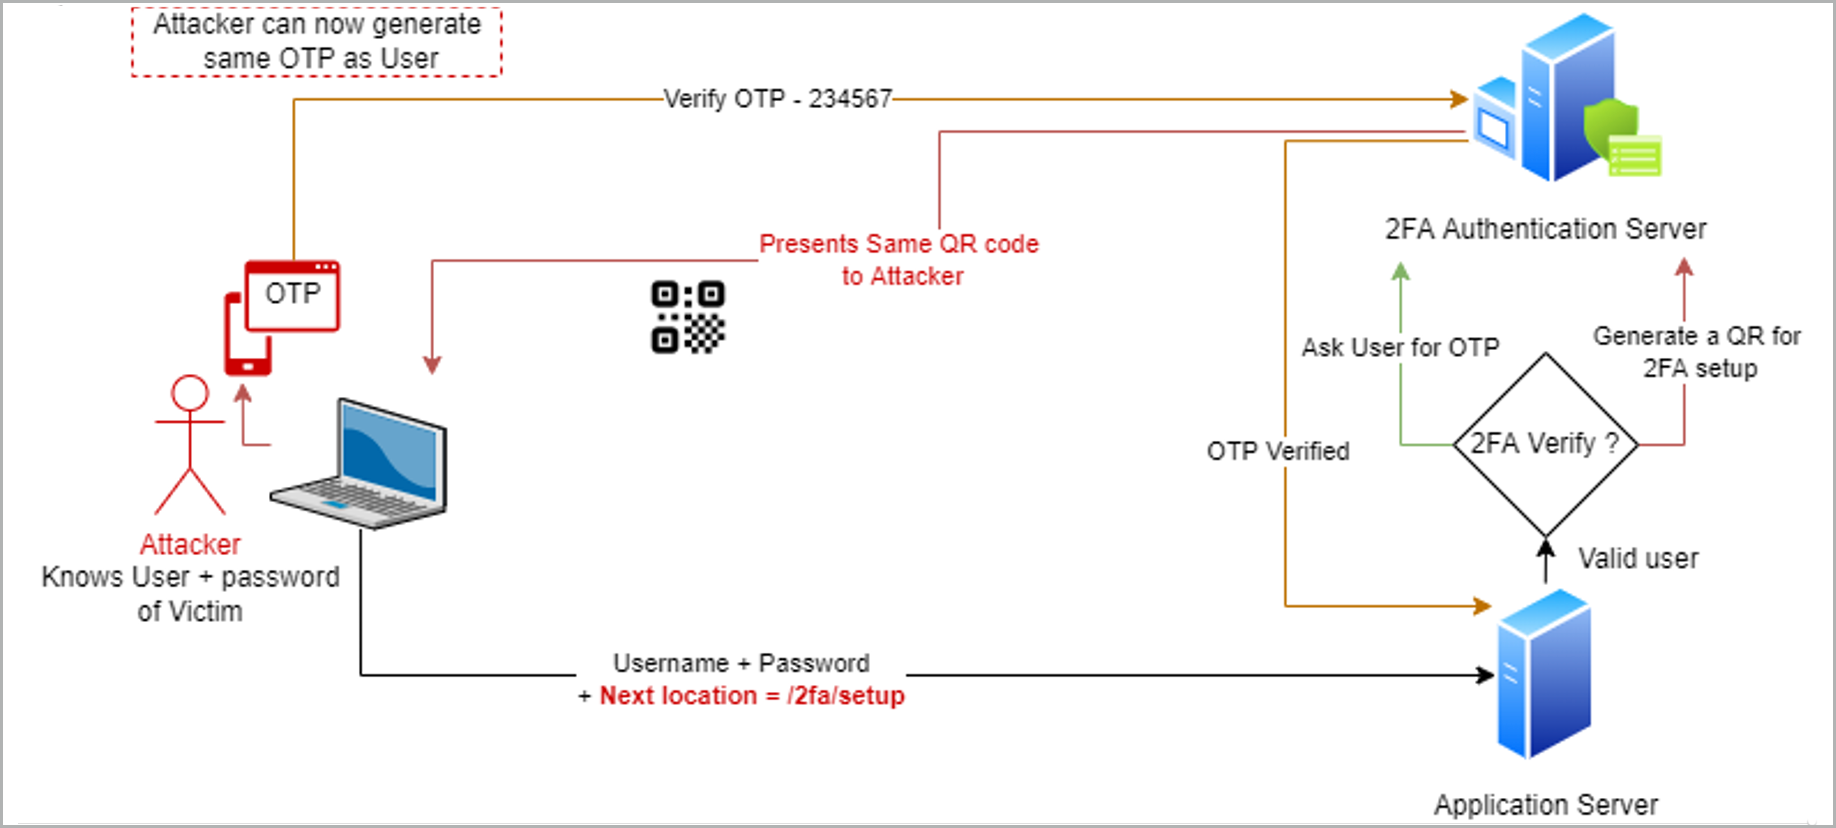 Attacker gains access to user's OTP | Synopsys